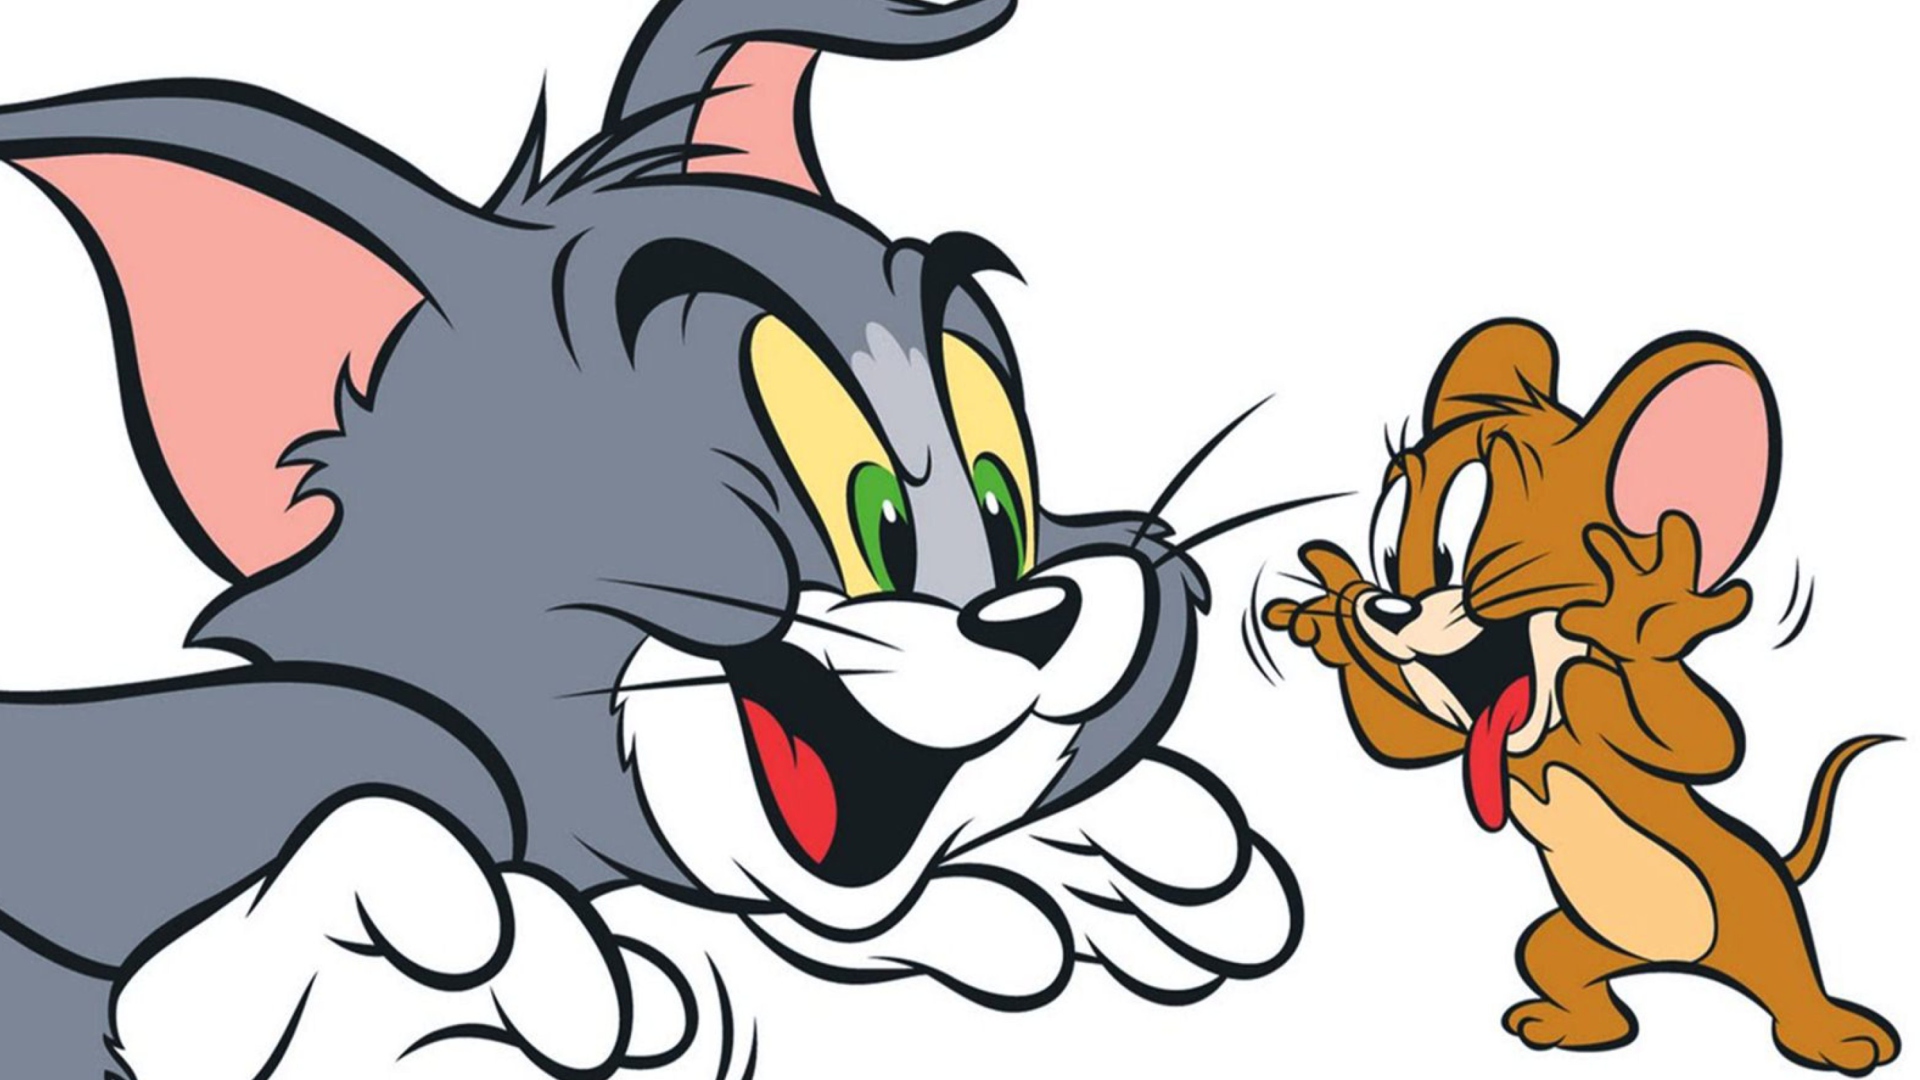 Tom And Jerry wallpaper 1920x1080